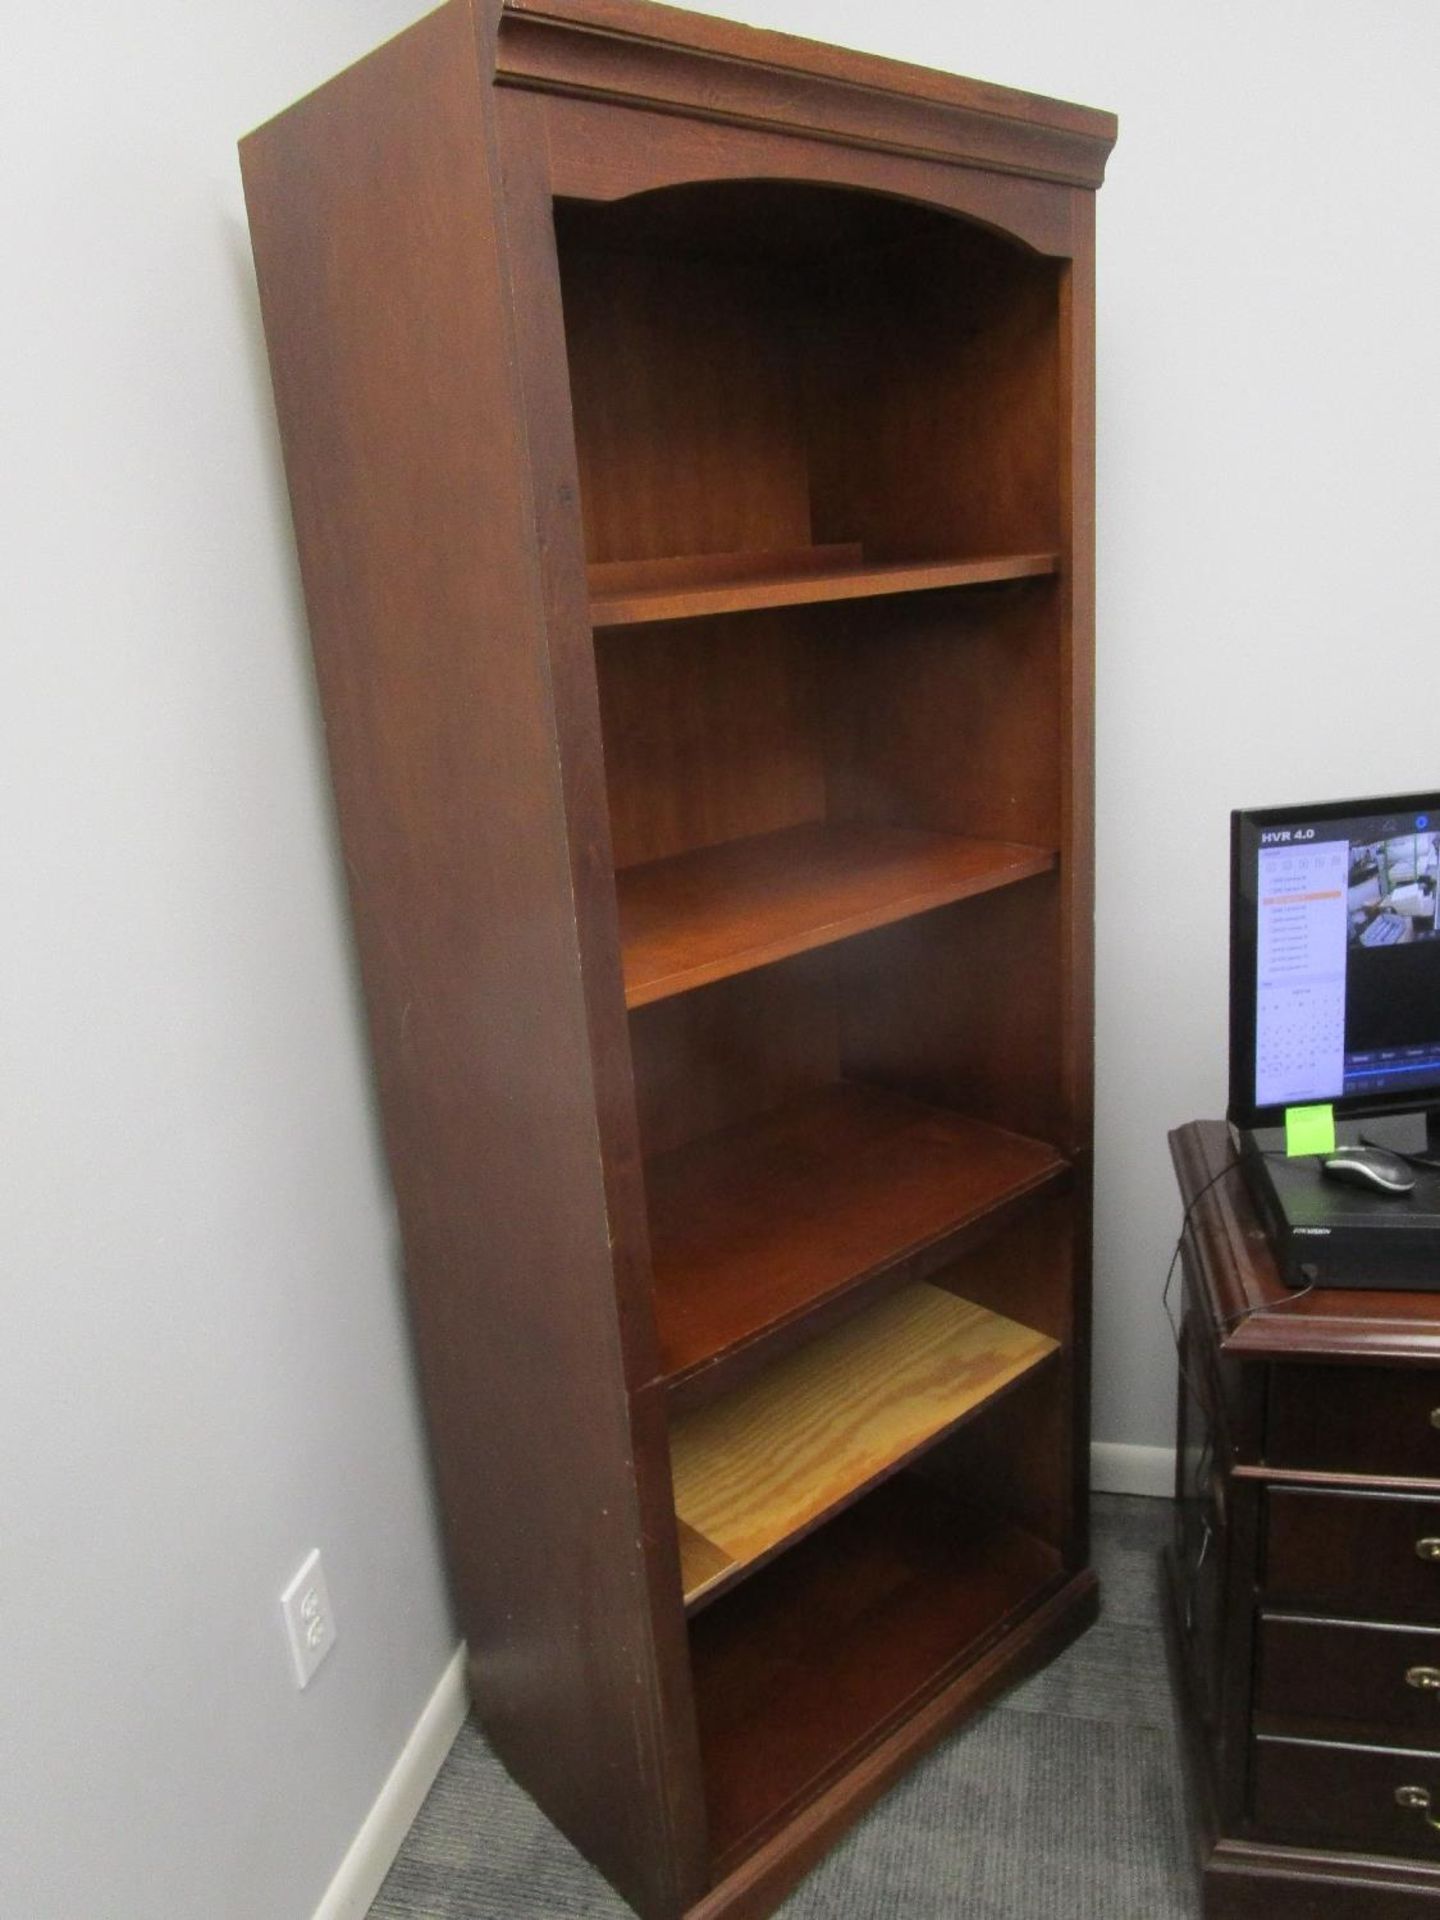 Lot of Executive Office Furniture - Image 2 of 5